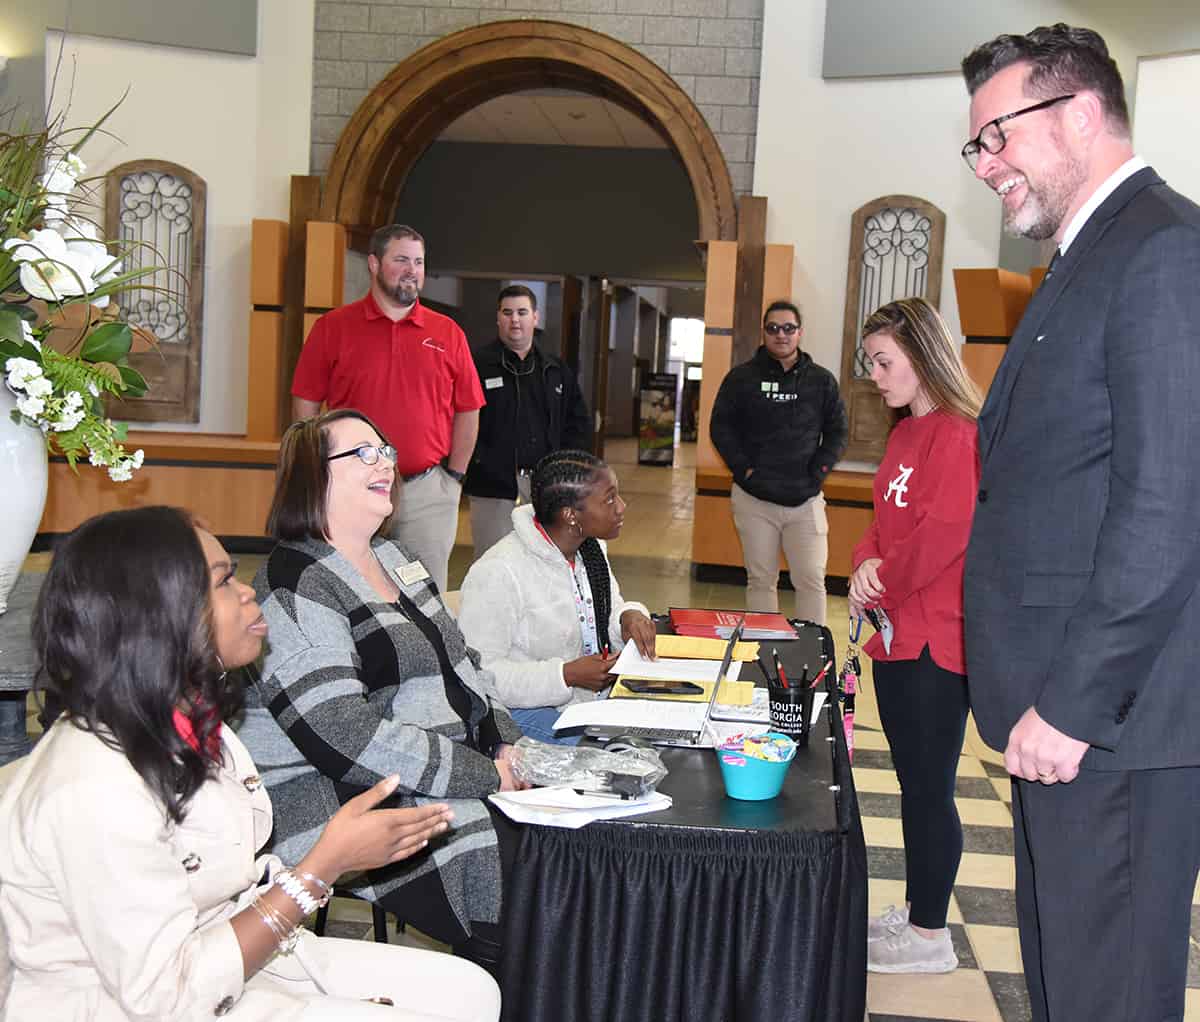 South Georgia Technical College President Dr. John Watford (standing right) is shown talking with South Georgia Technical College employees and students during the recent Spring Semester registration. SGTC will hold another Spring Semester registration on January 7th.